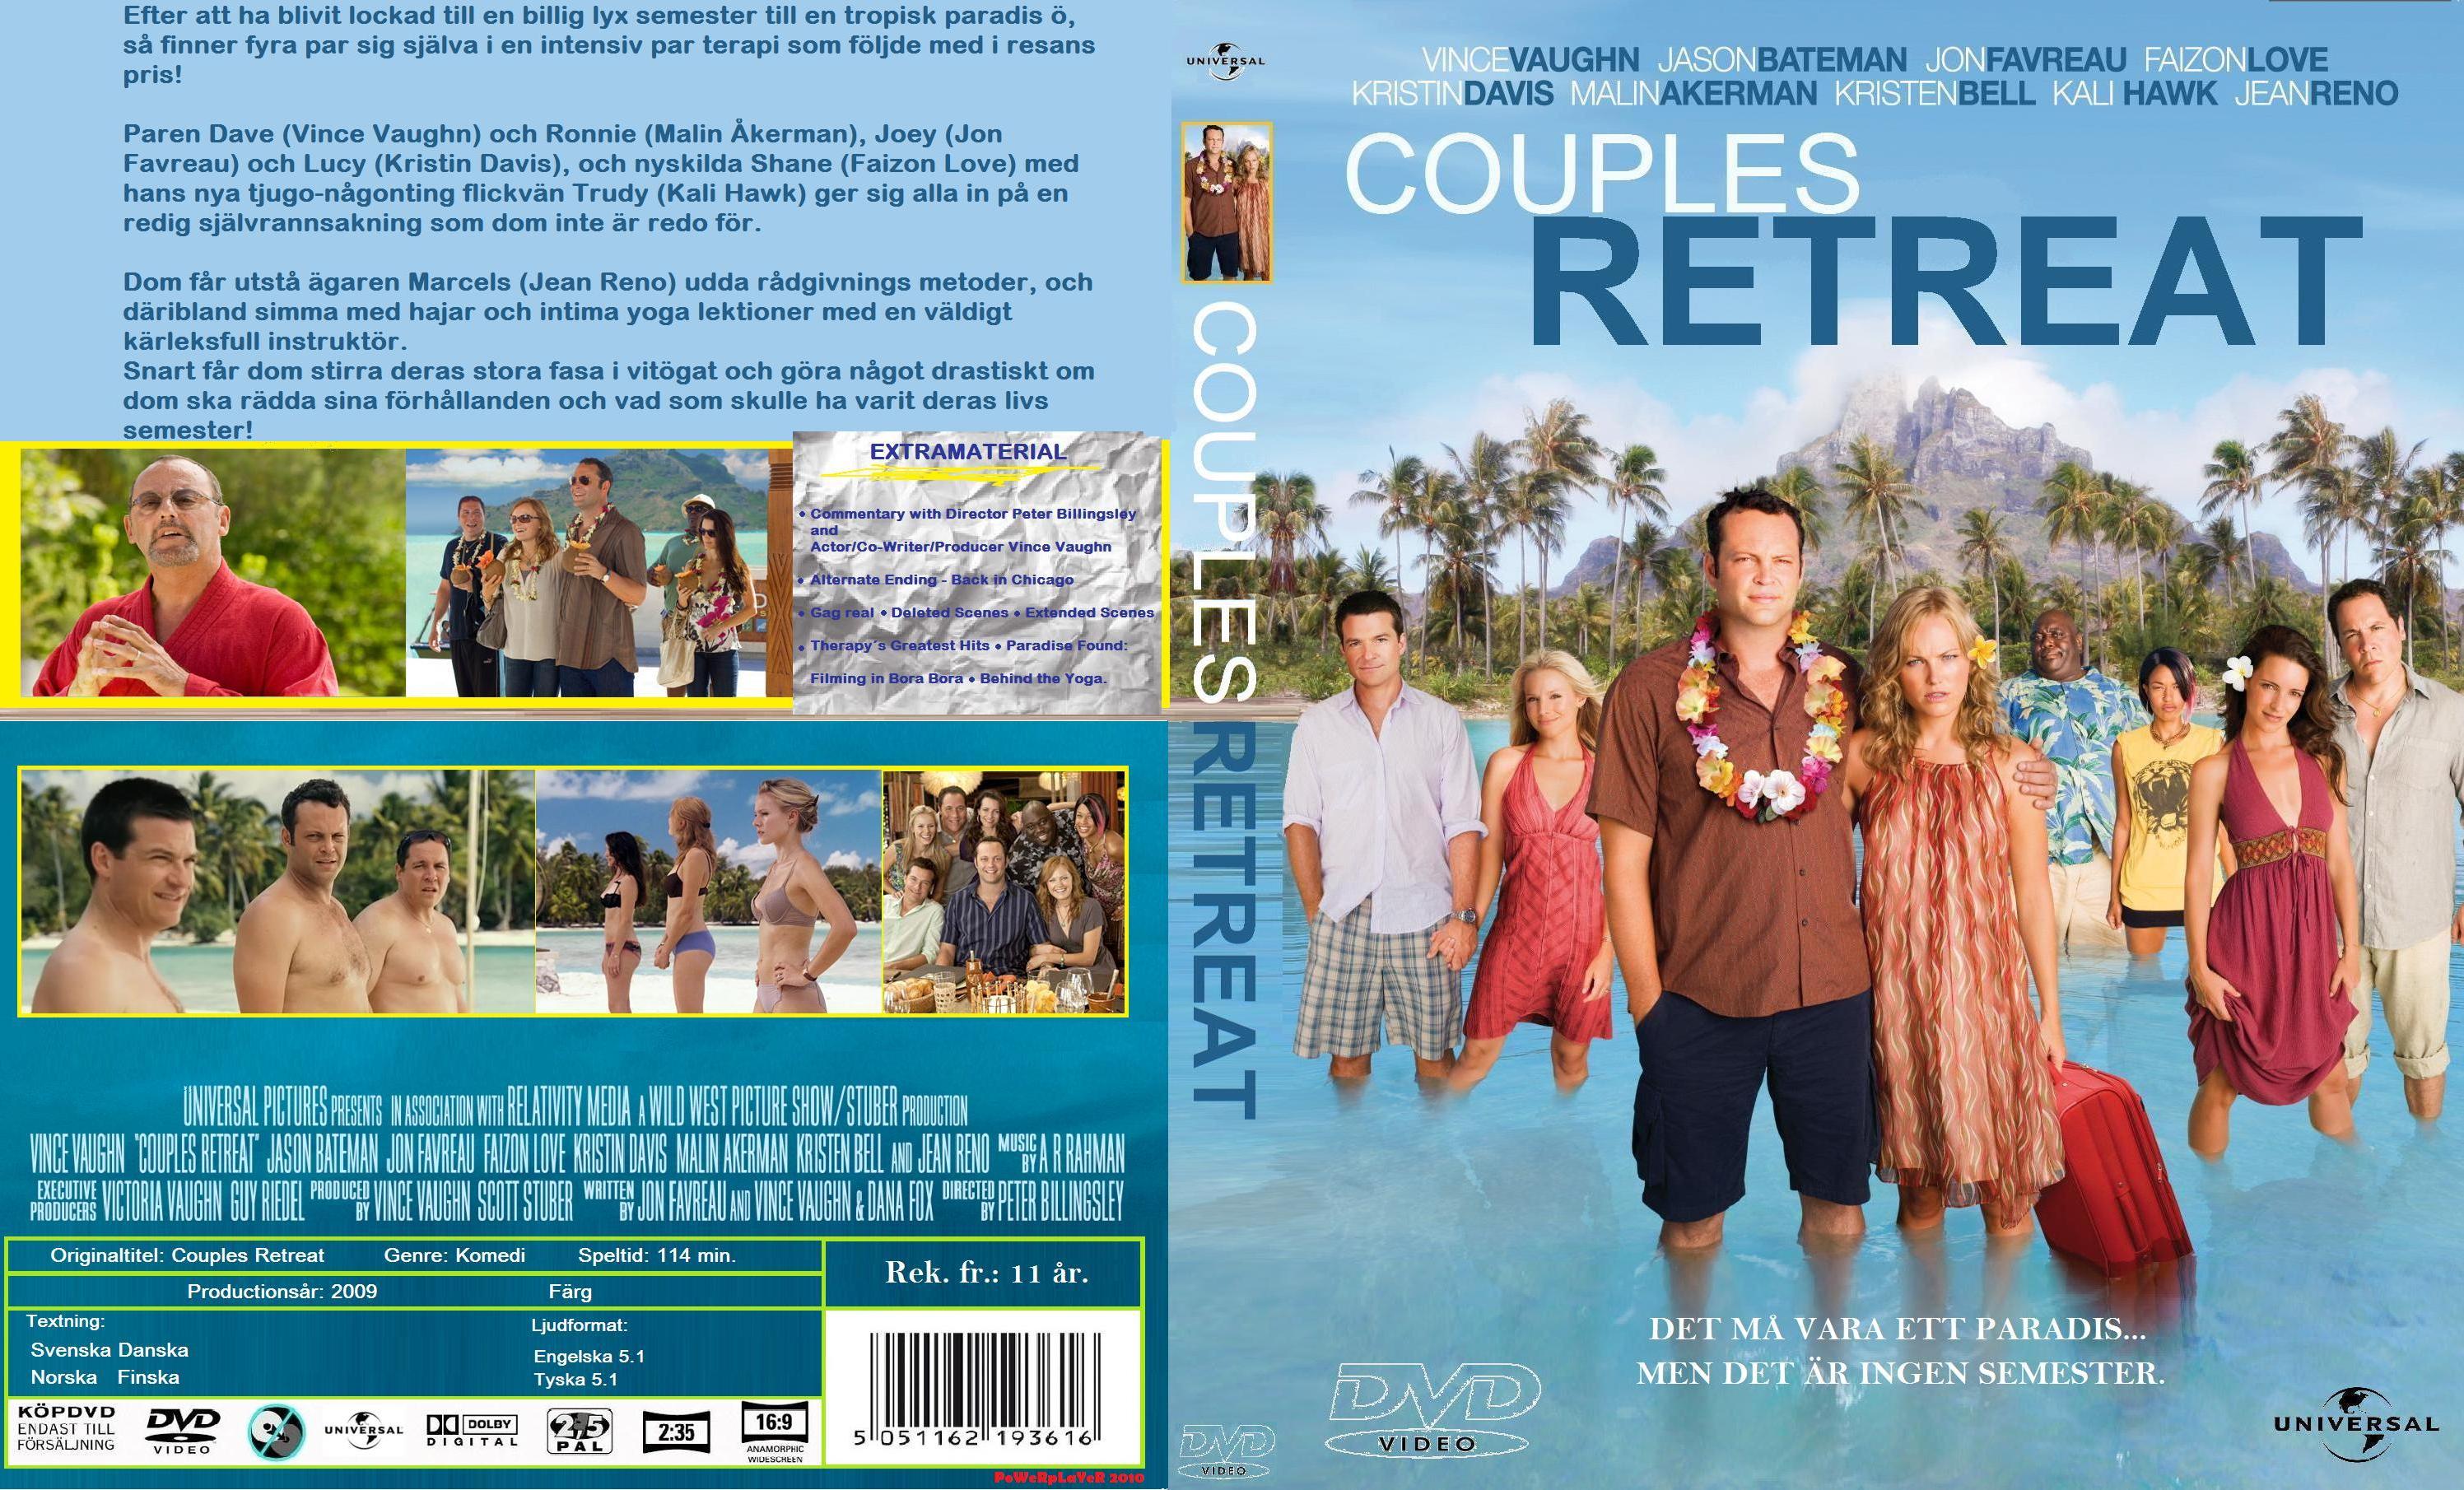 Couples Retreat (2009) French dvd movie cover